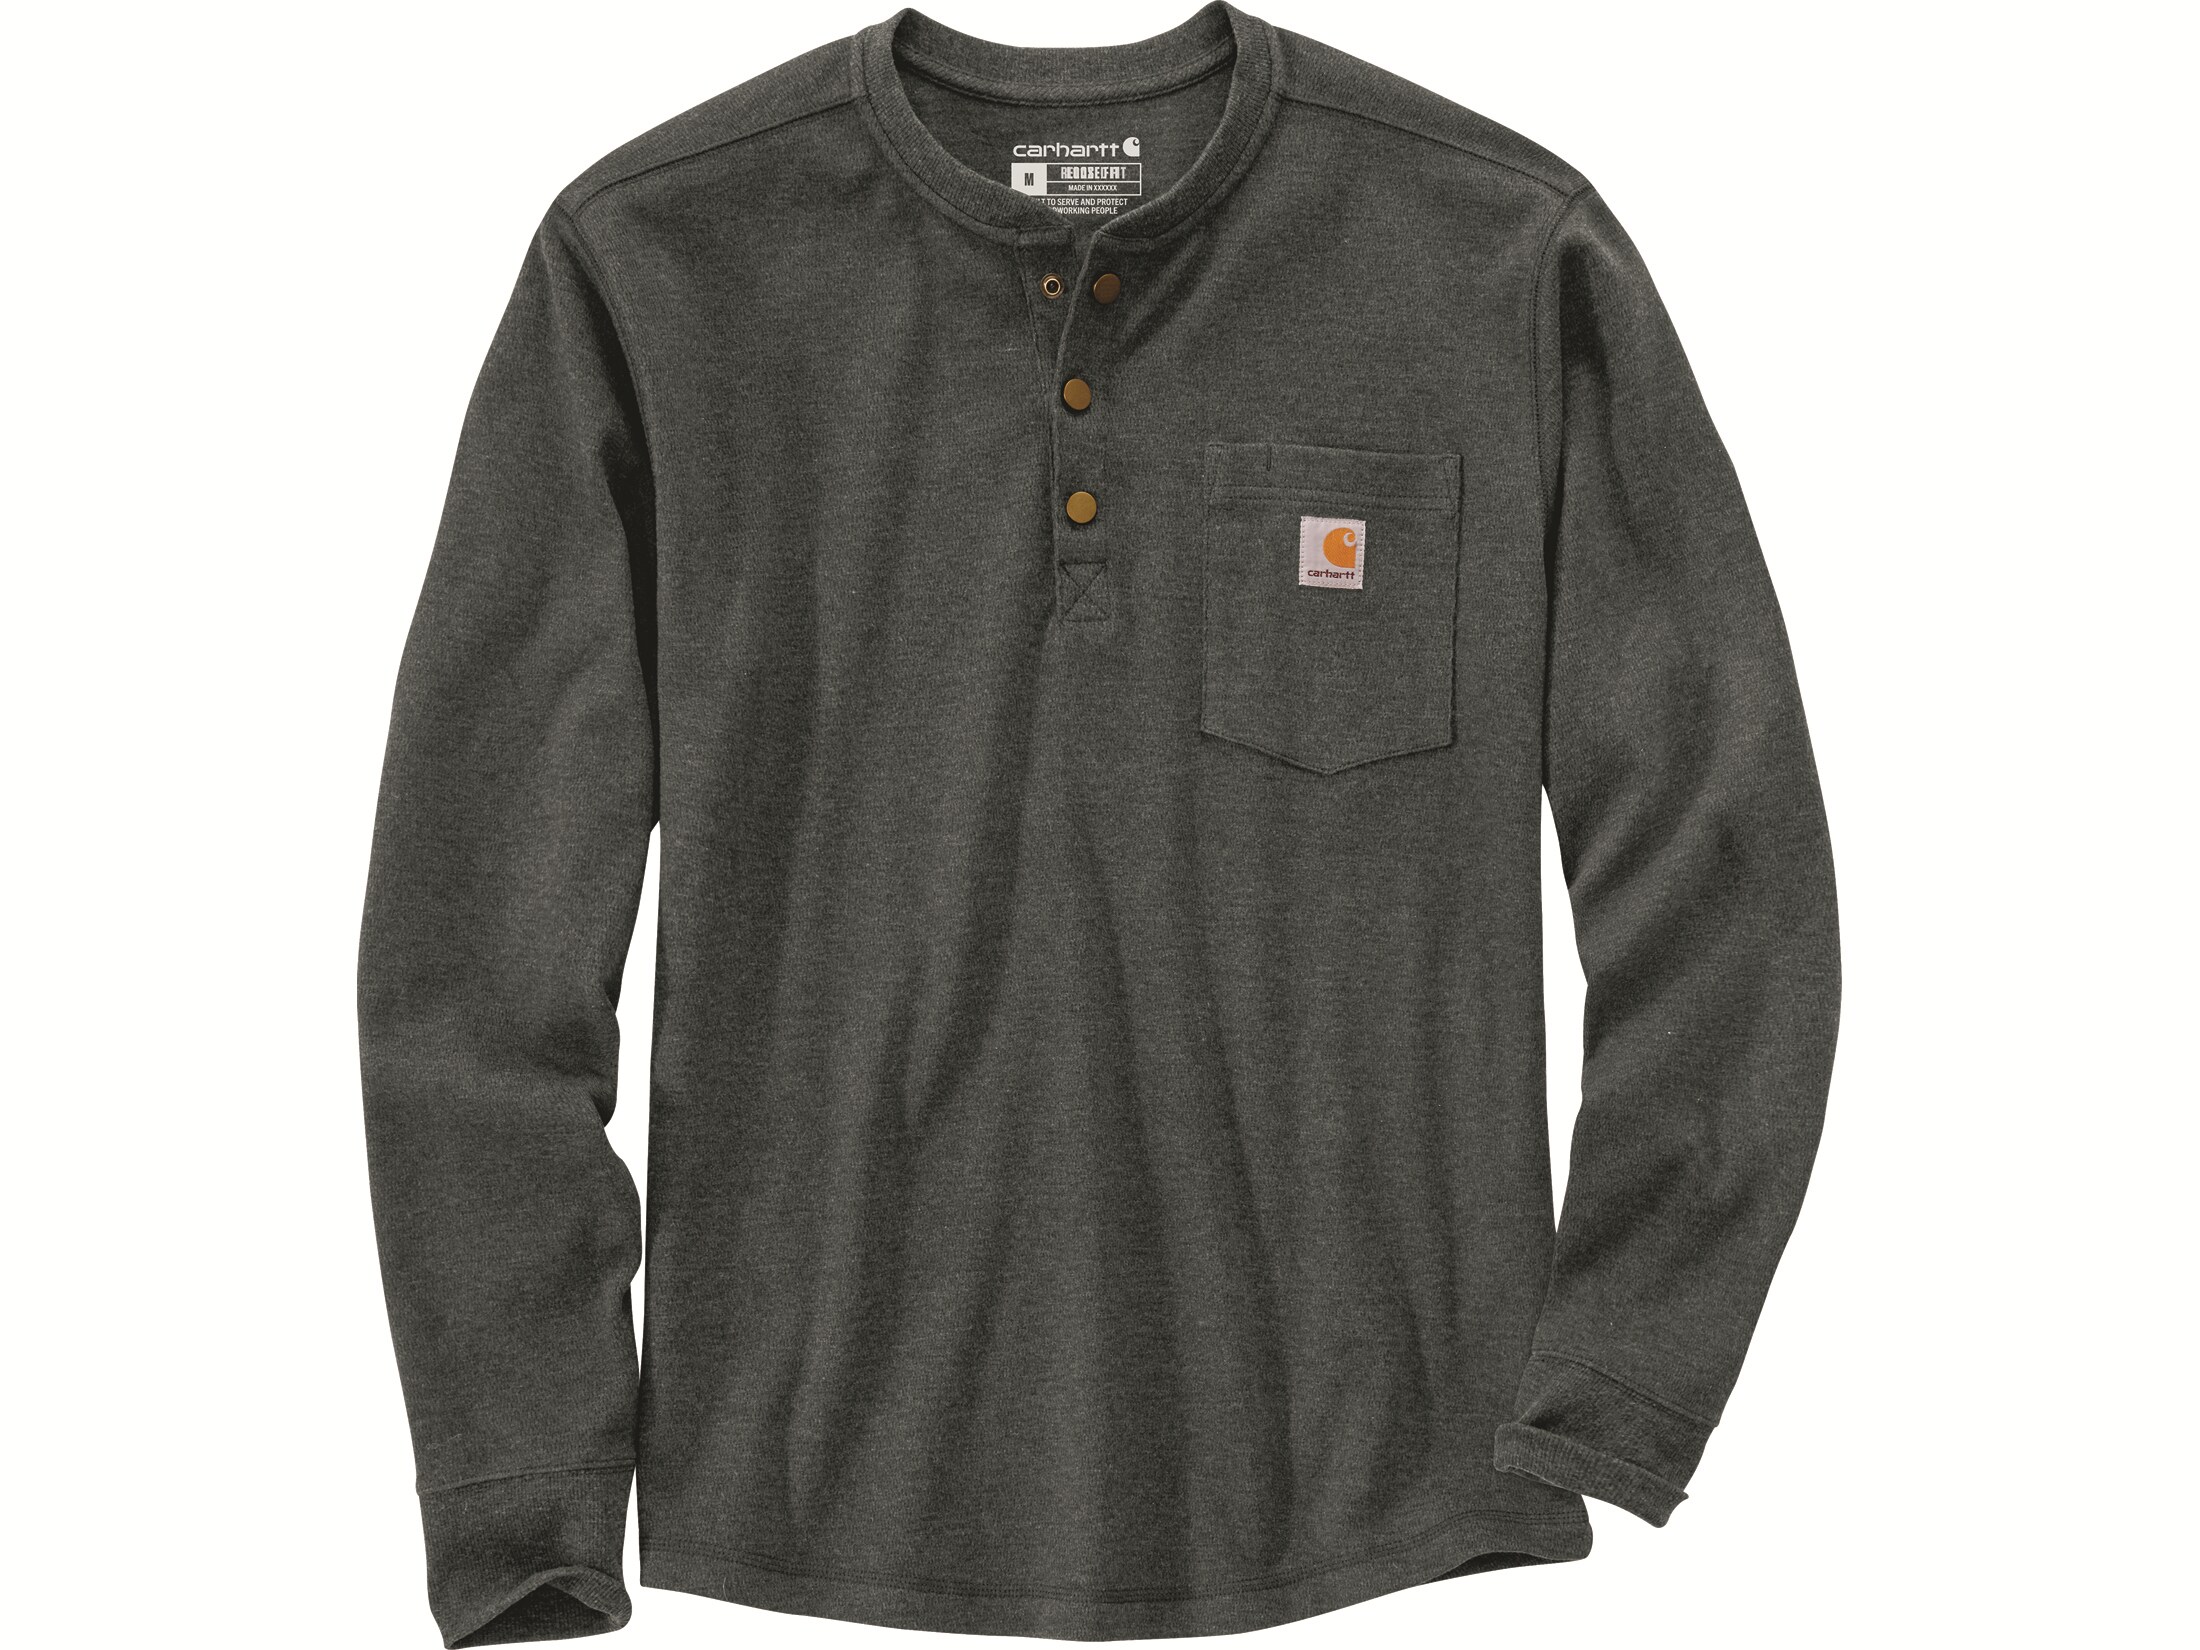 Carhartt Men's Relaxed Fit Heavyweight Long Sleeve Pocket Thermal